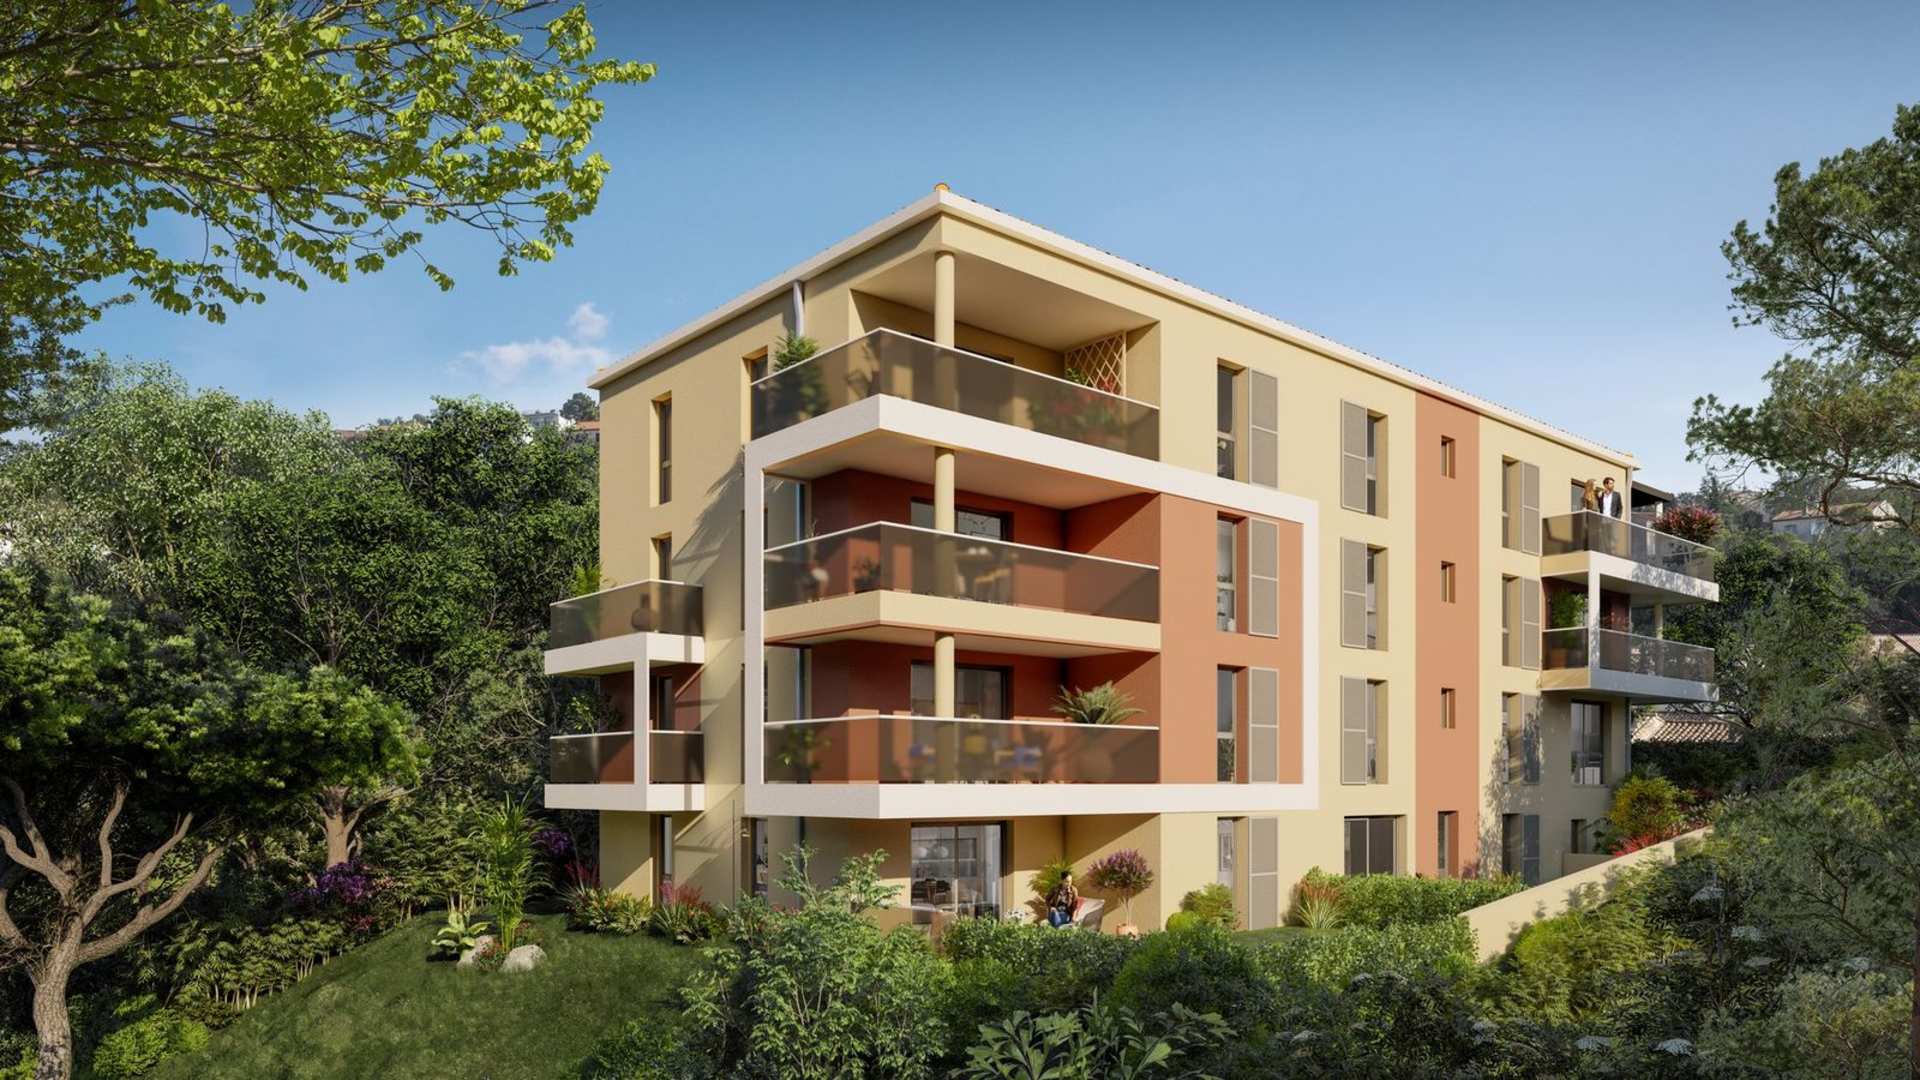 2 bed Apartment For Sale in French Riviera, South of France